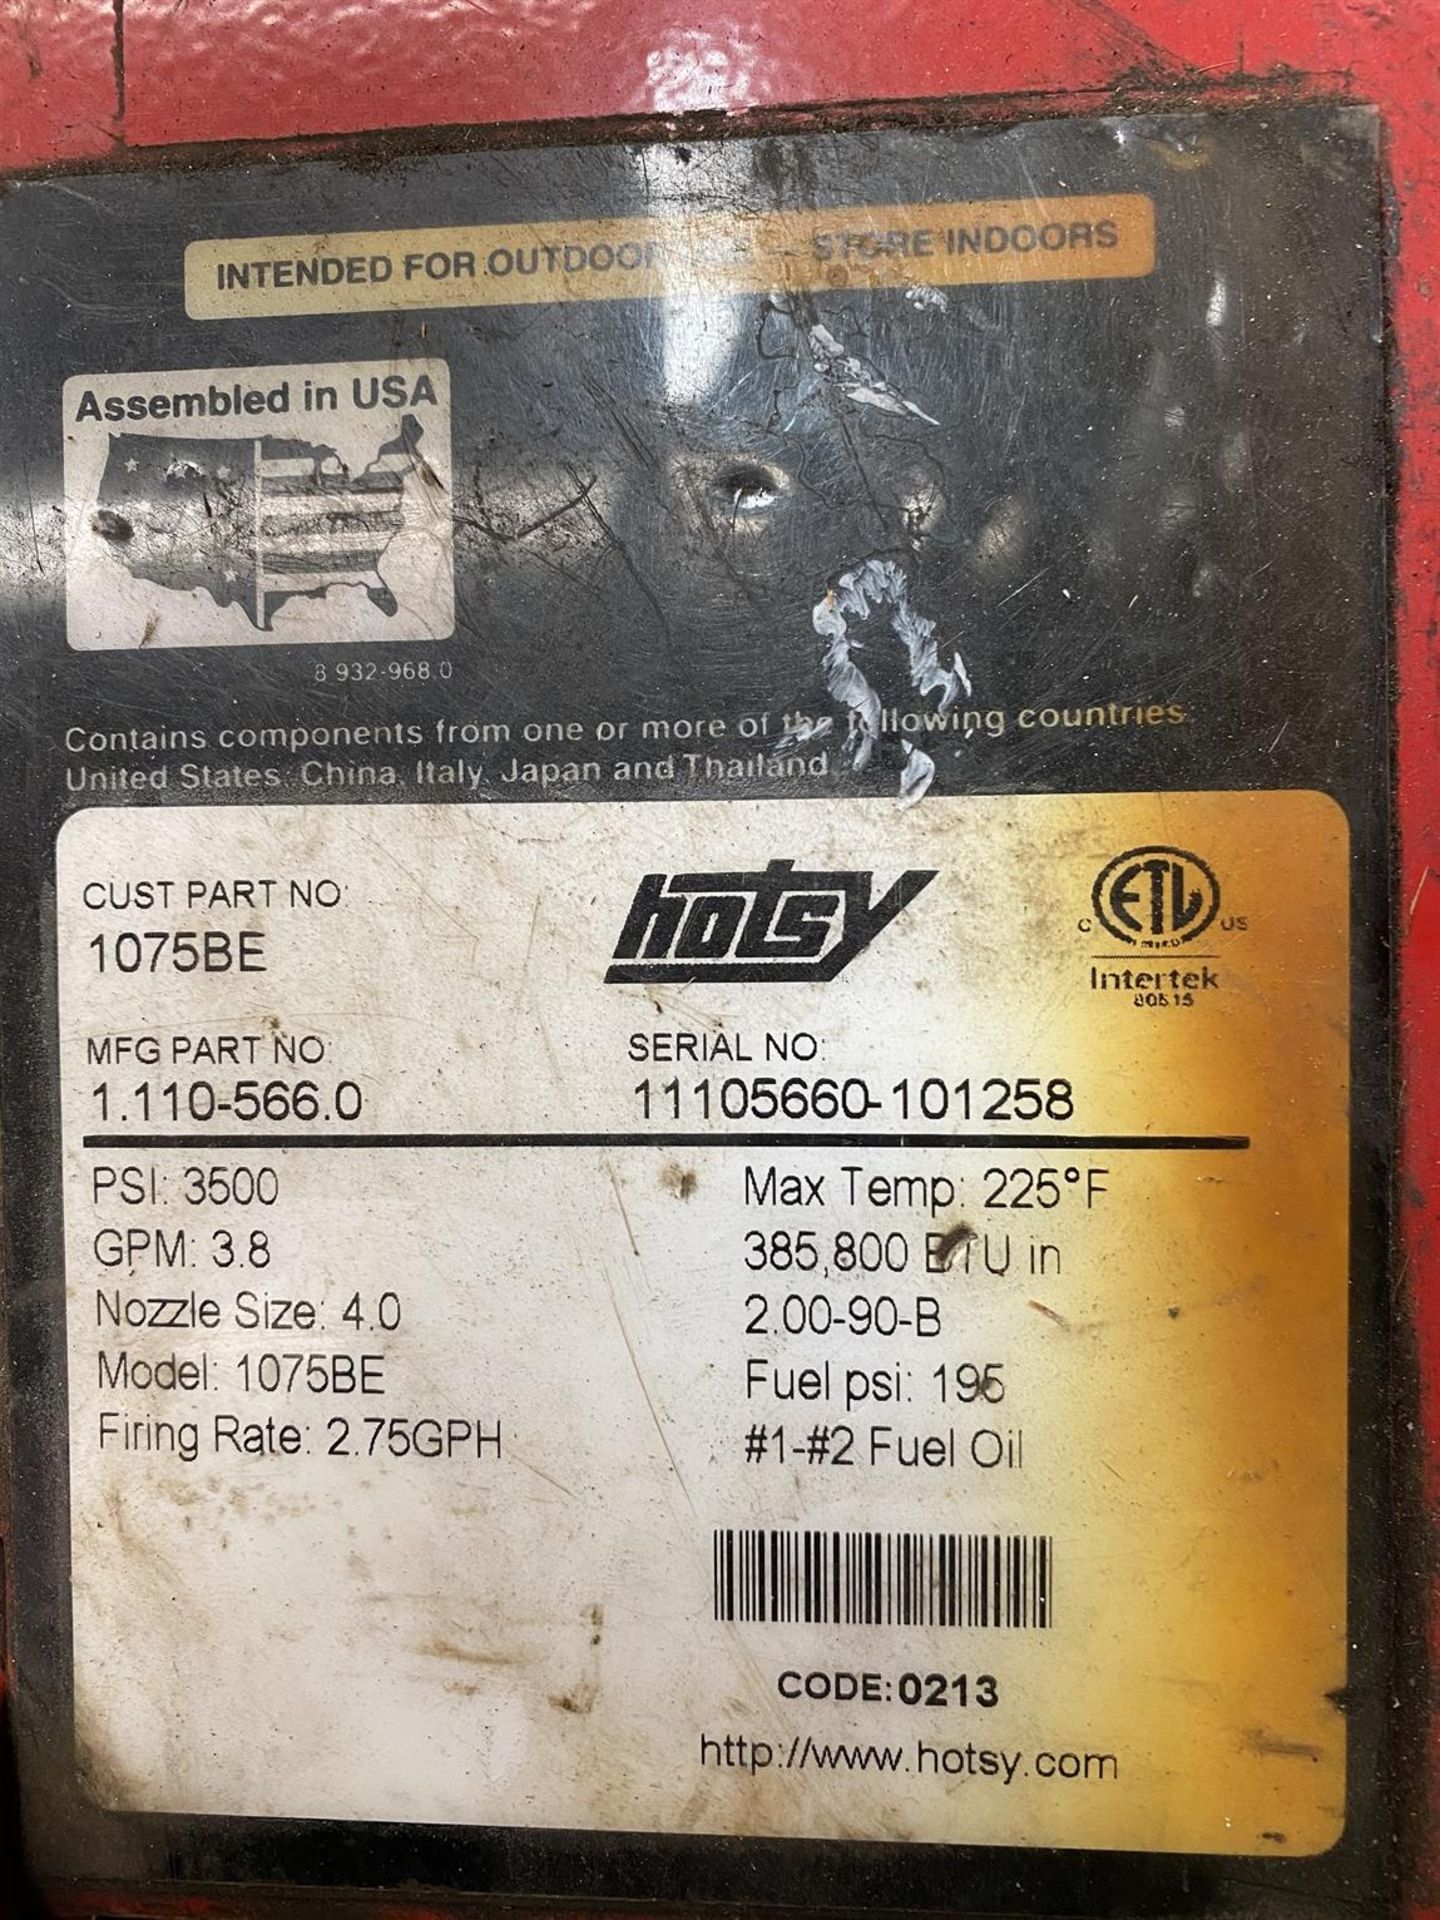 HOTSY 1075BE Pressure Washer, s/n 11105660-101258, 3500 PSI, 385,800 BTUin, 225 Degree F Max Temp, - Image 5 of 5